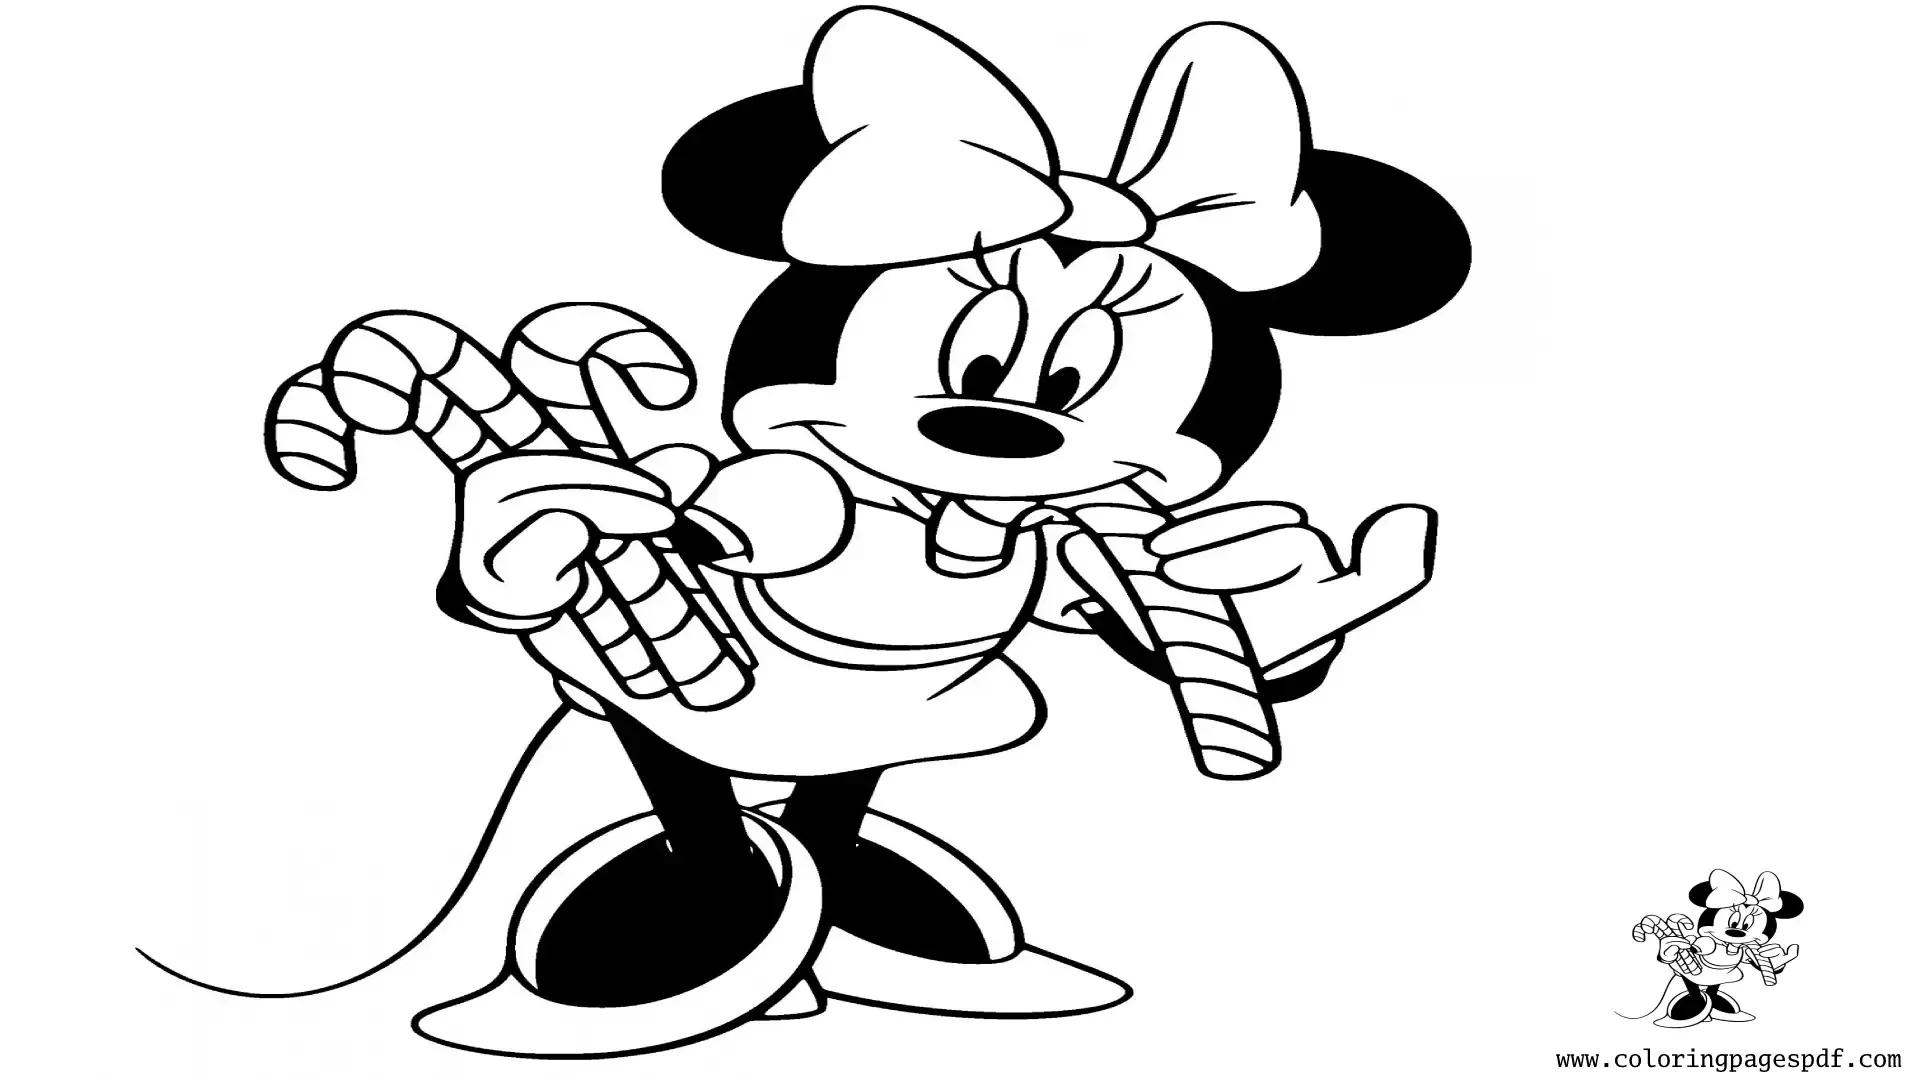 Coloring Pages Of Minnie Mouse Eating Christmas Candy